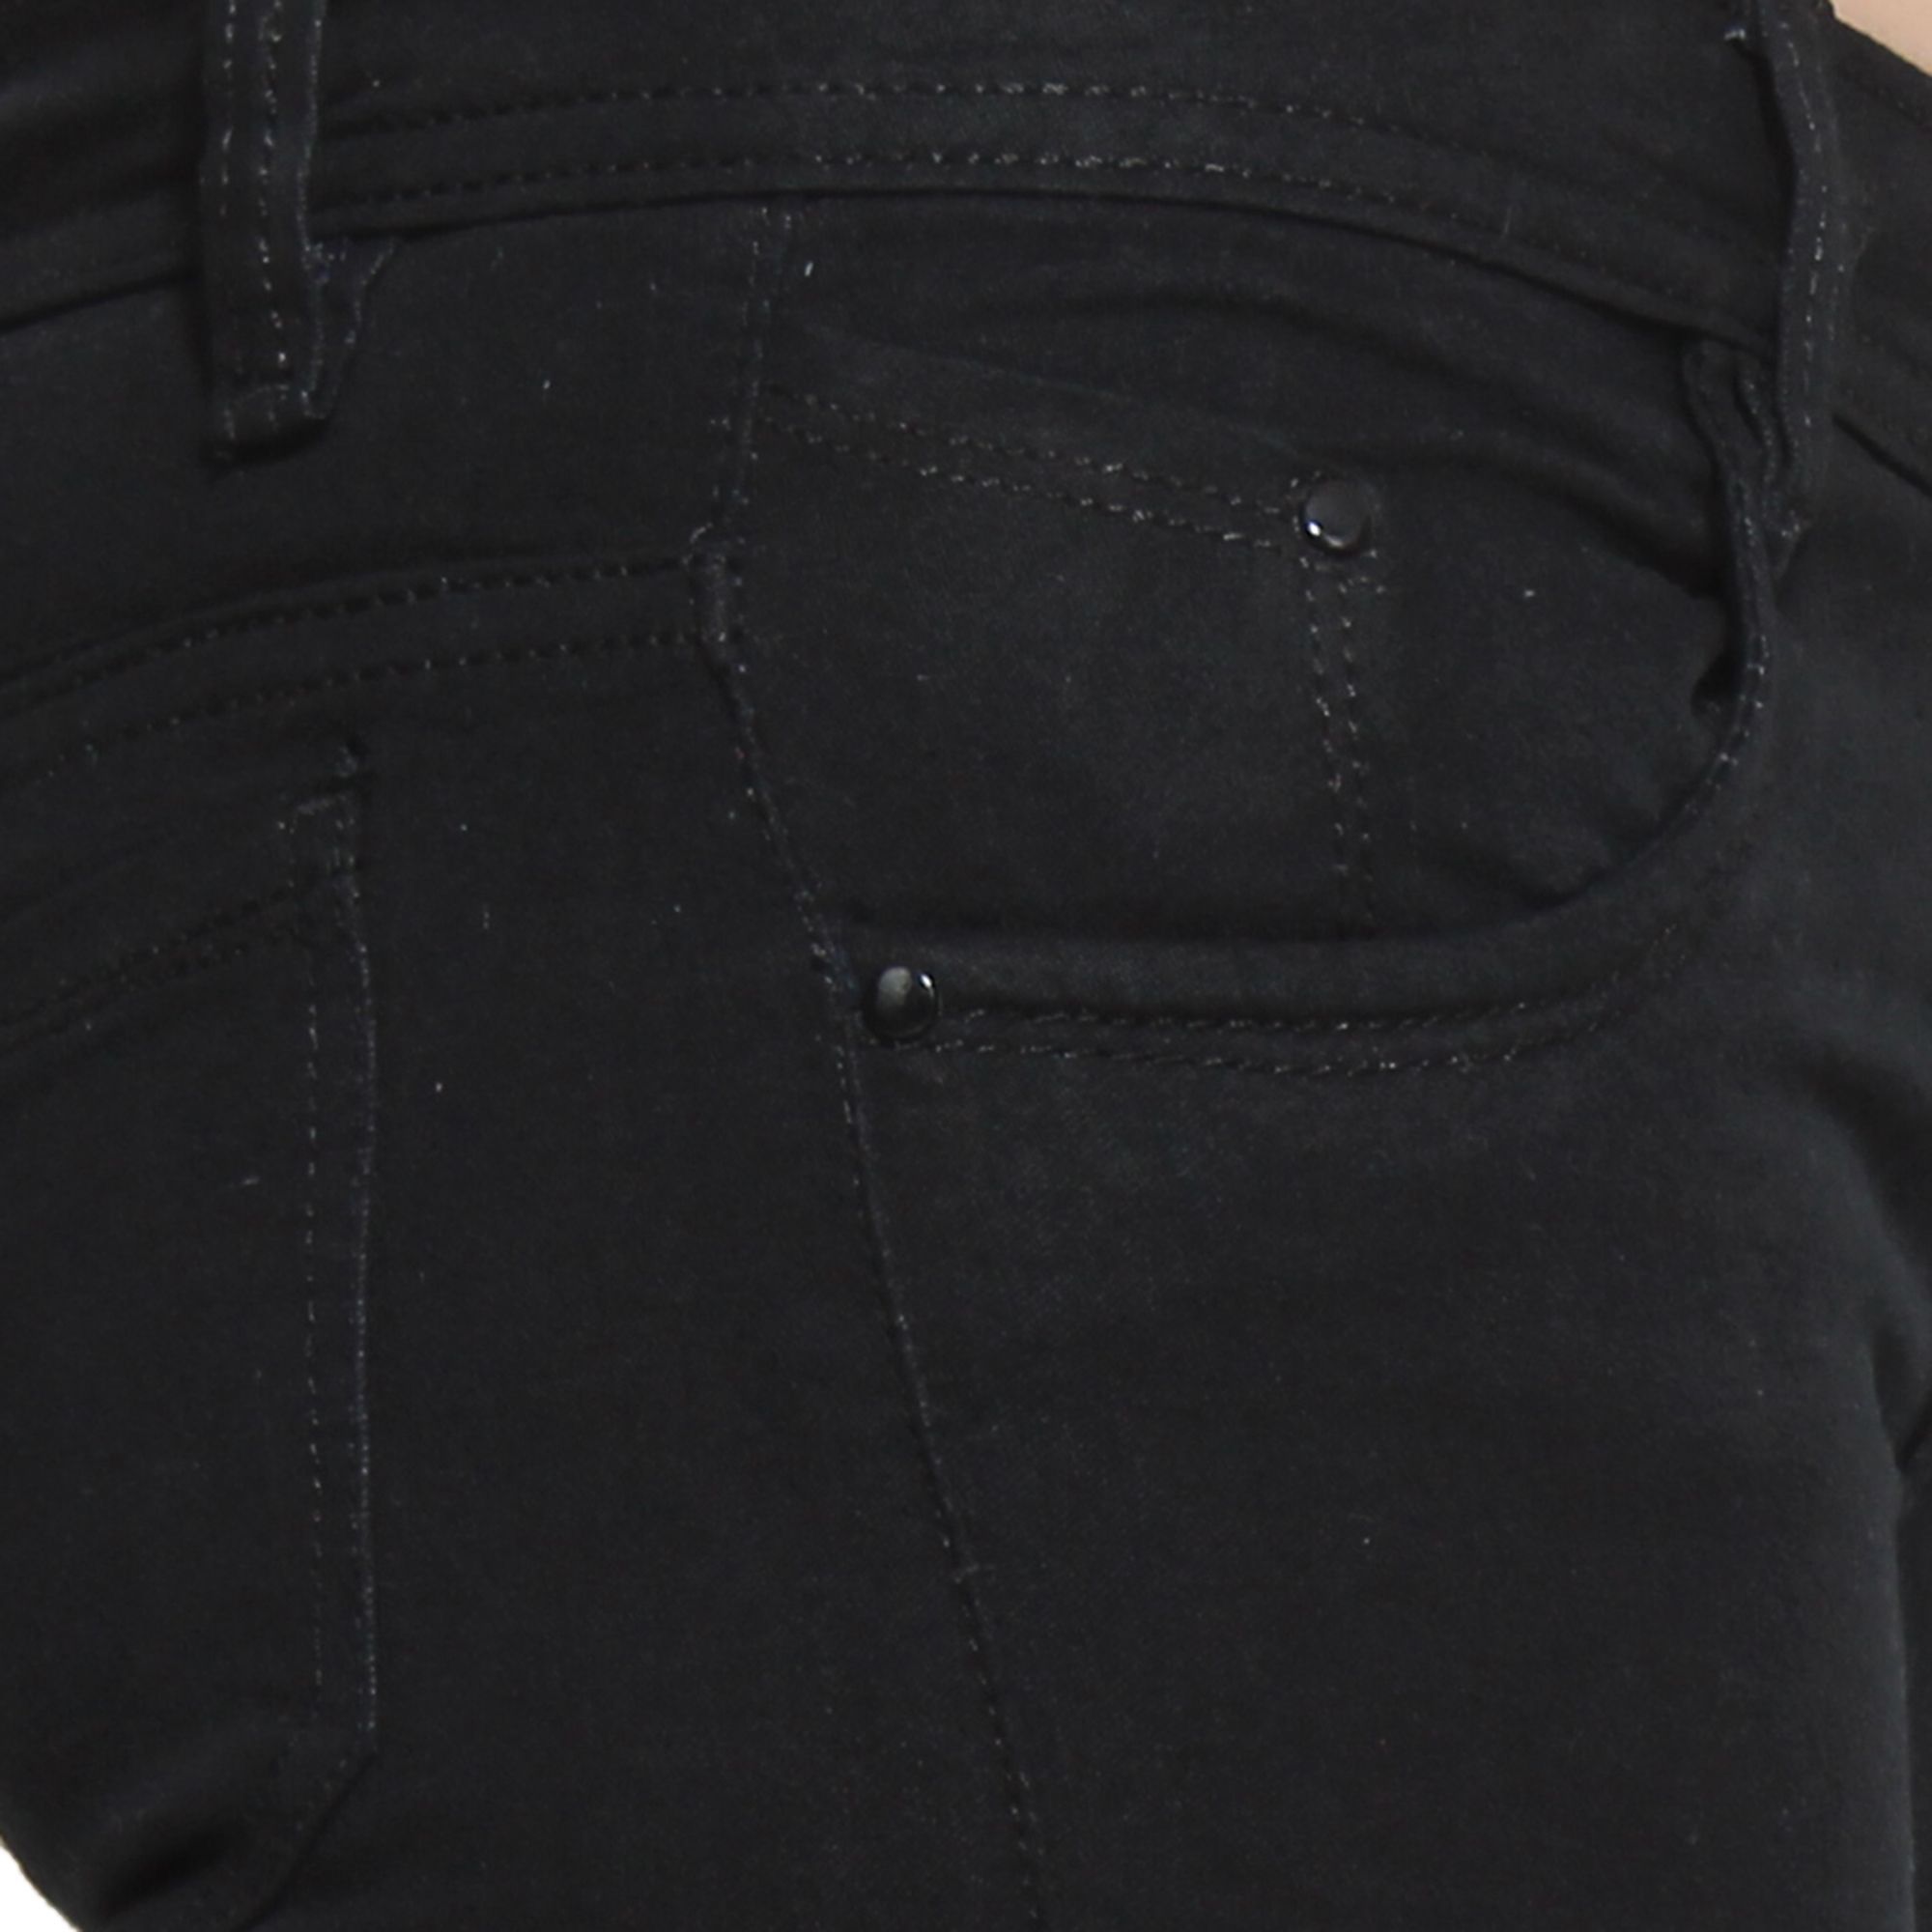 Buy Lee zone Denim Jeans - Black Online at Best Prices in India - Snapdeal